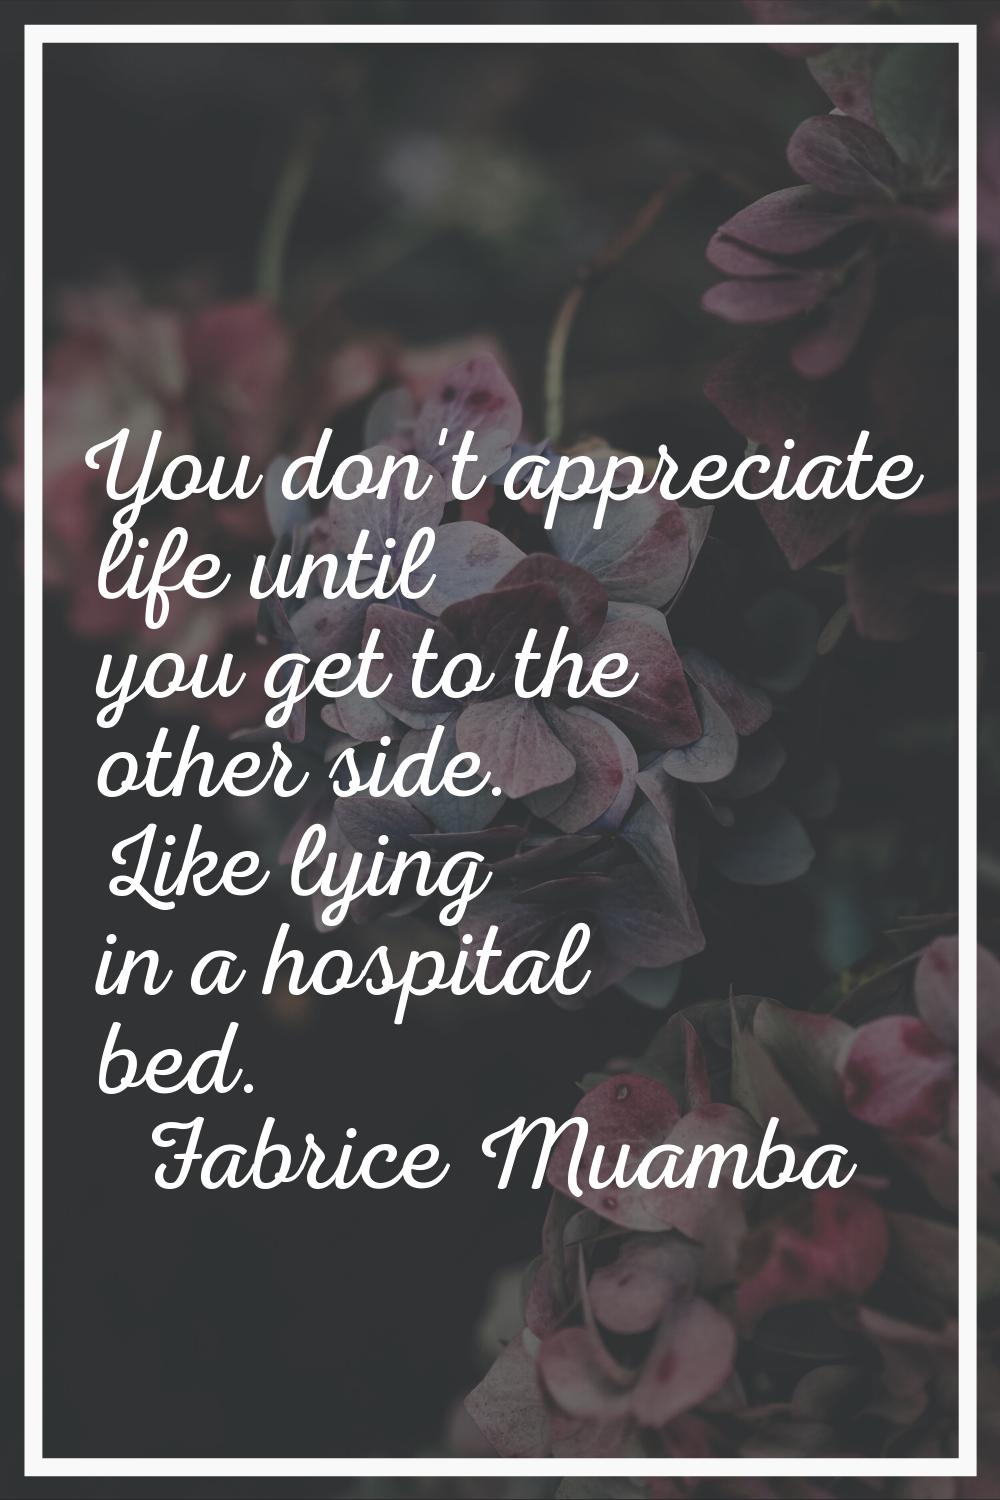 You don't appreciate life until you get to the other side. Like lying in a hospital bed.